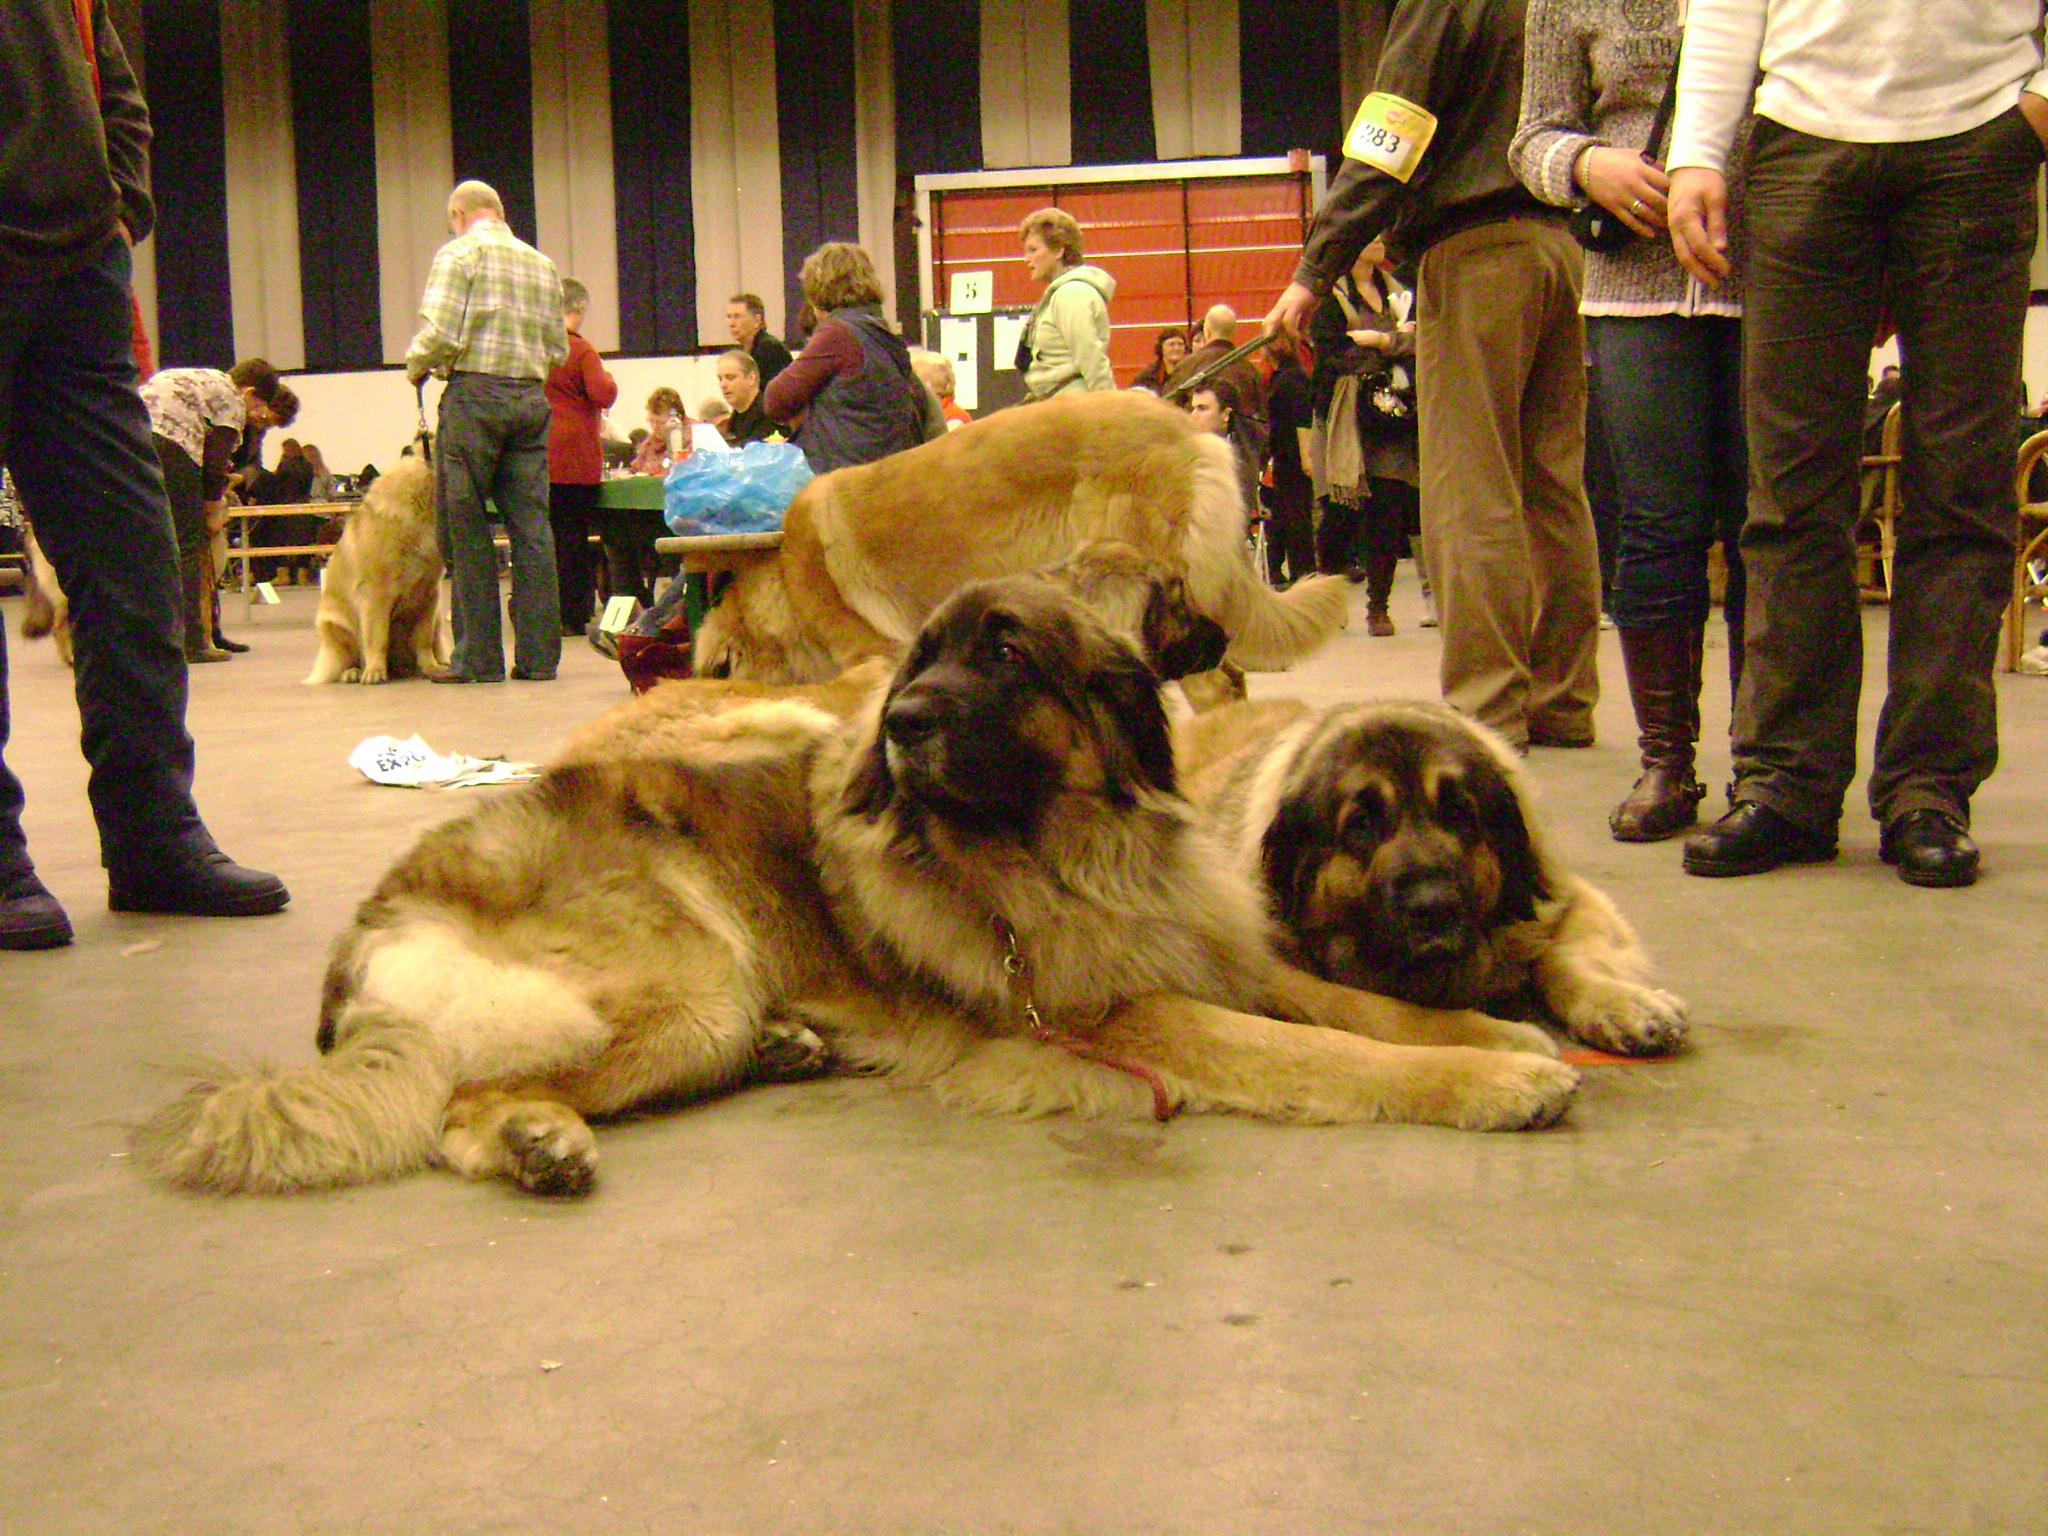 two dogs laying on the floor in an indoor area